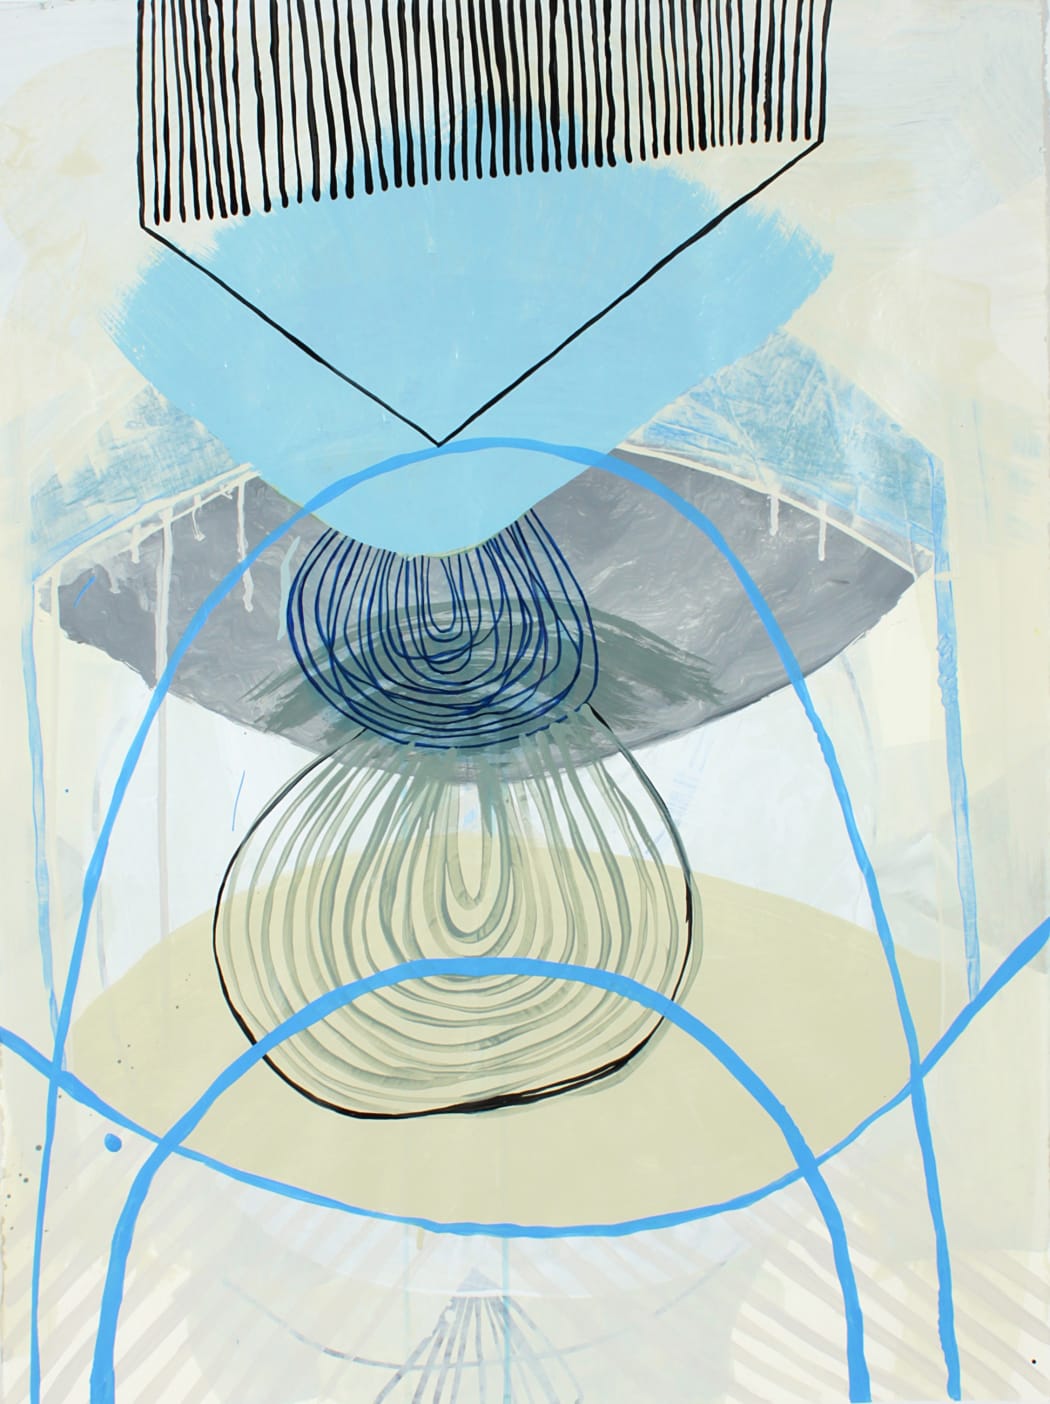 Ky Anderson's "Two Over Four" done with acrylic and ink on paper in various shades of blue, tan, gray and black. The painting depicts small line strokes on the foreground layer overlapping large more muted flat shape designs.